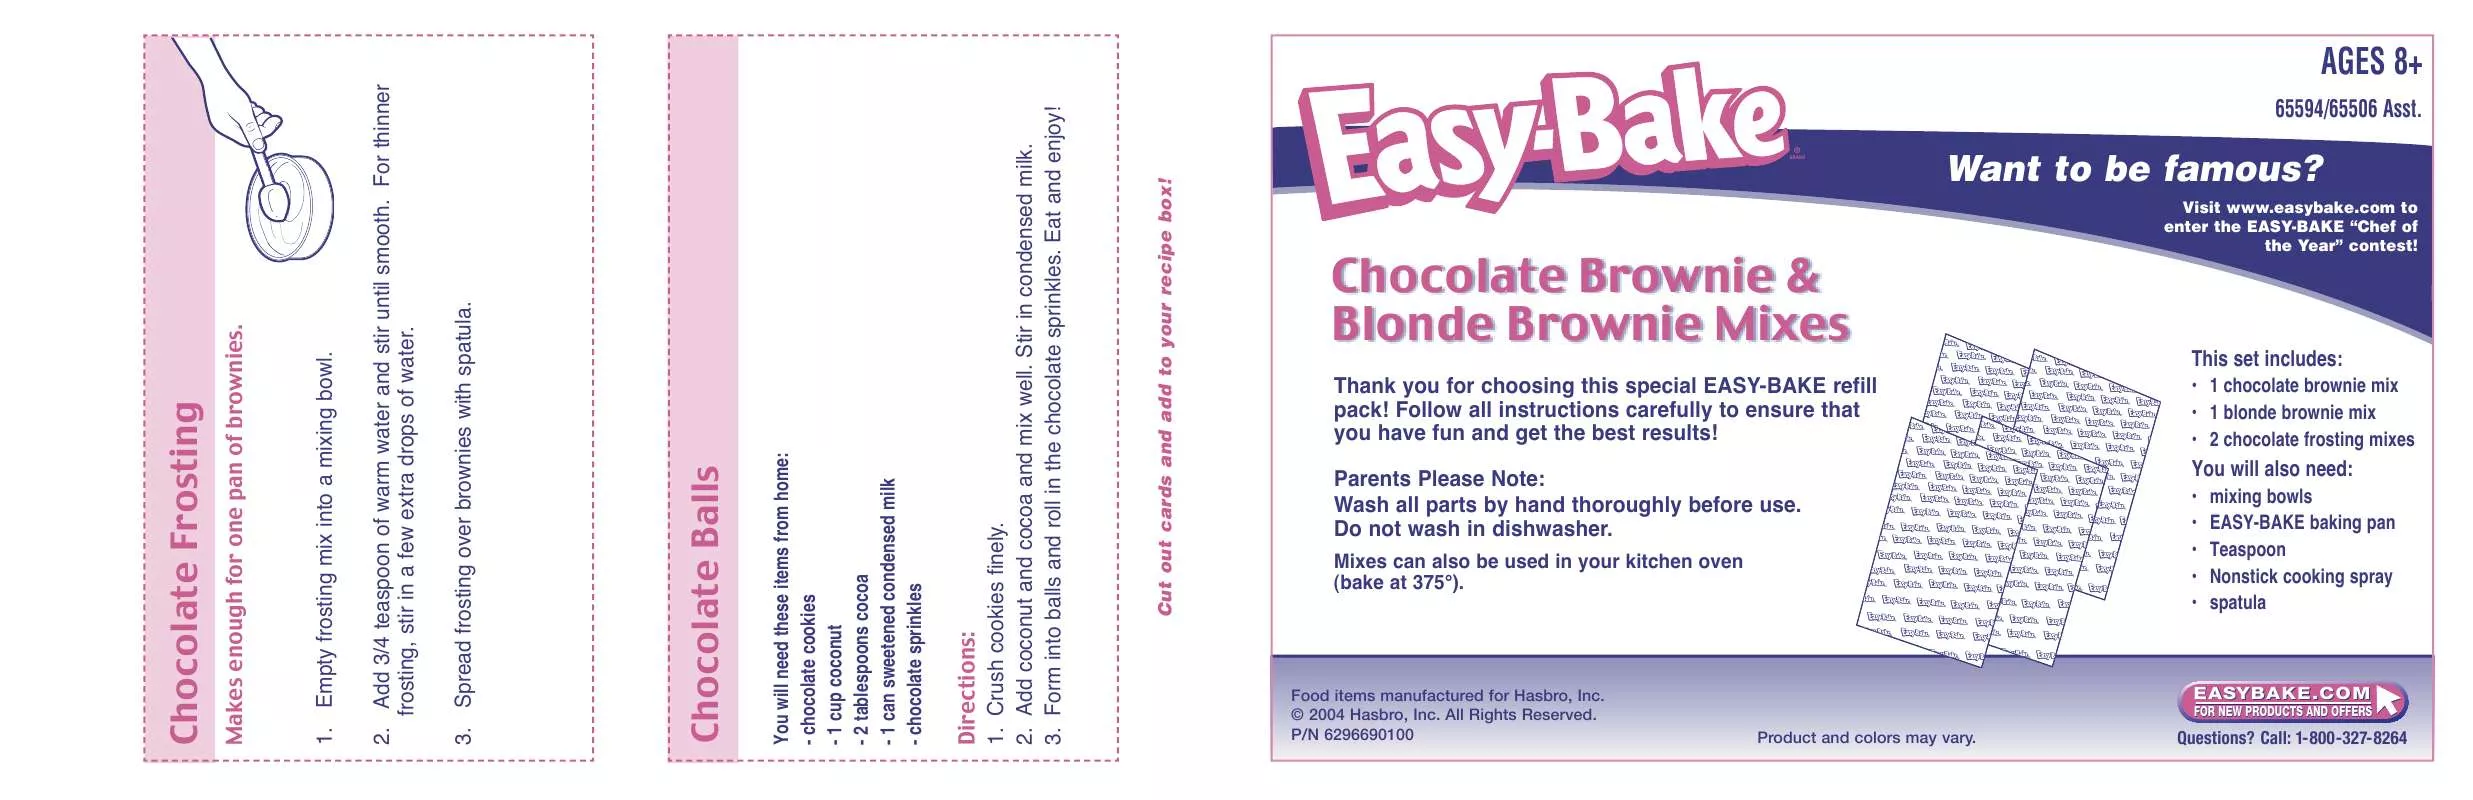 Mode d'emploi HASBRO EASY BAKE CHOCOLATE BROWNIE AND BLONDE BROWNIE MIXES 2004